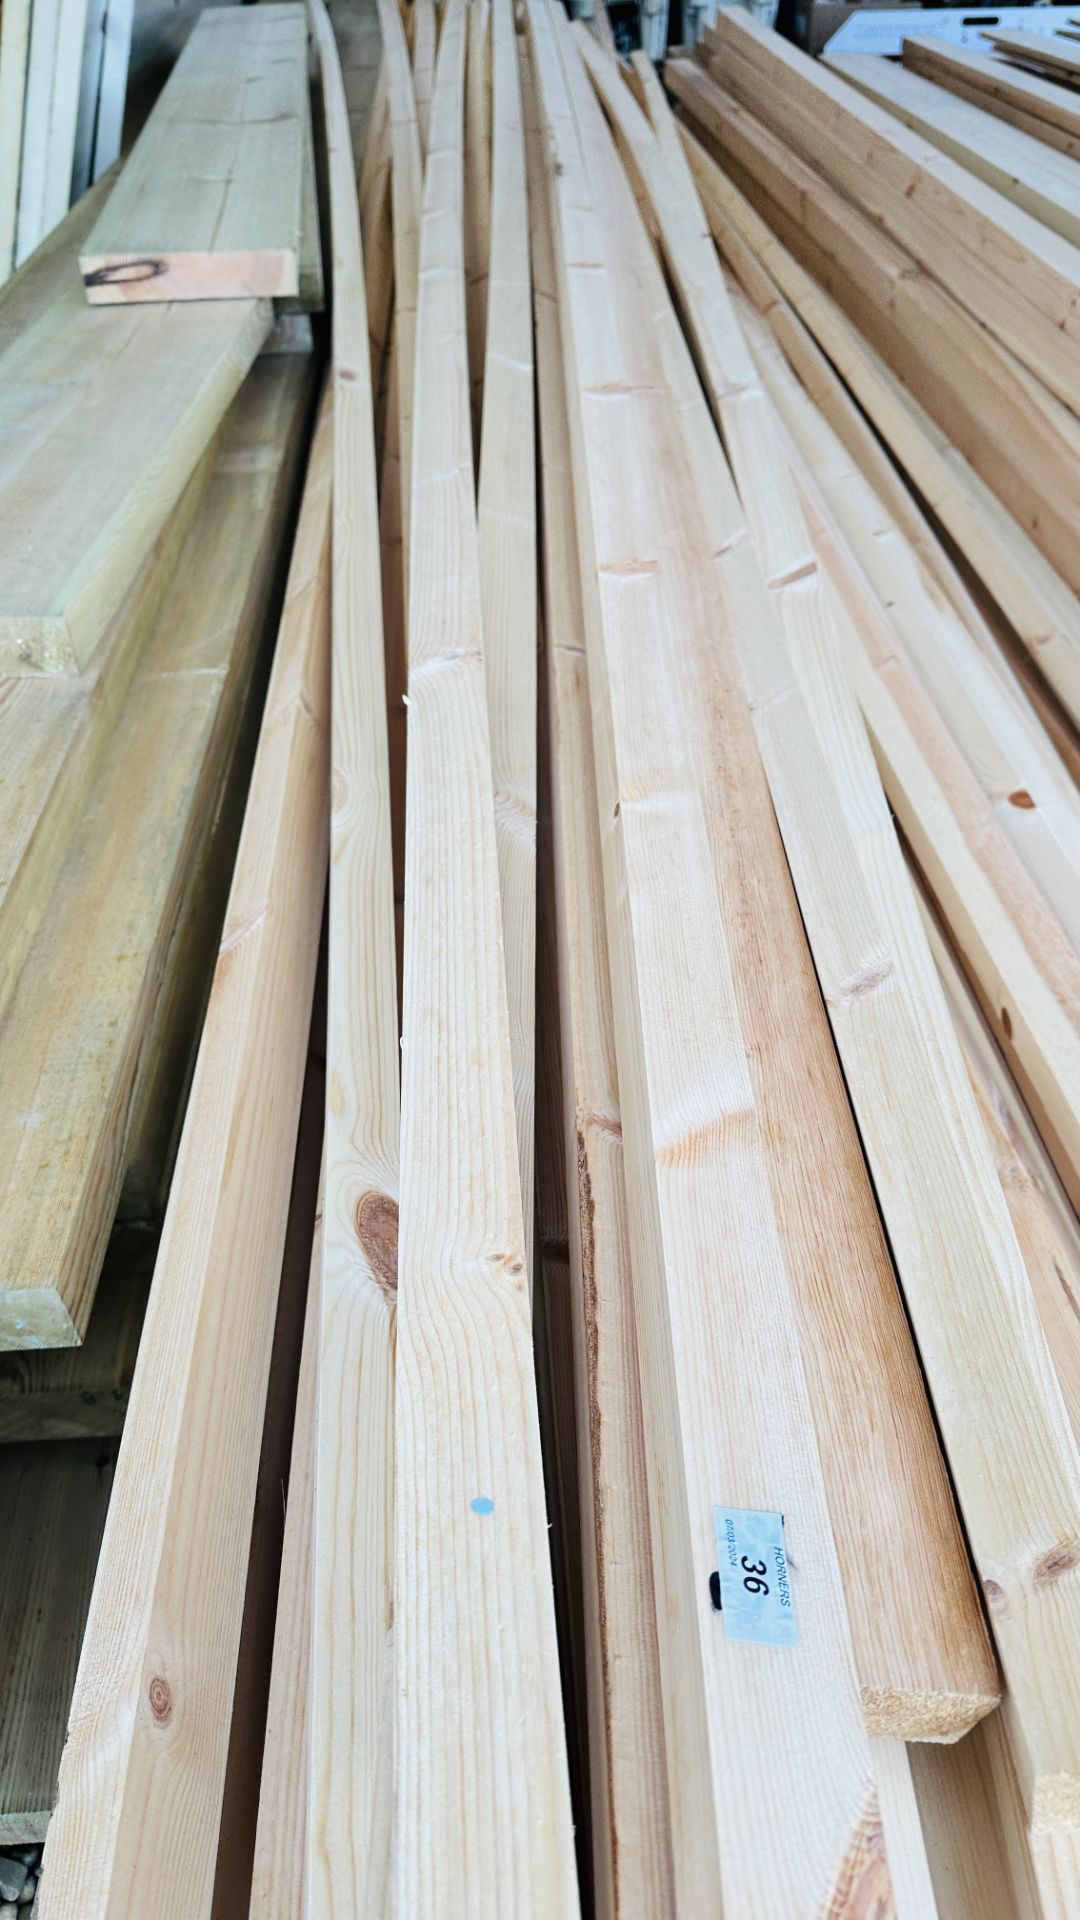 APPROX 140 LENGTHS OF 45MM X 35MM PLANED TIMBER, MINIMUM LENGTHS APPROX 4M, MAXIMUM LENGTH APPROX 5. - Image 6 of 6